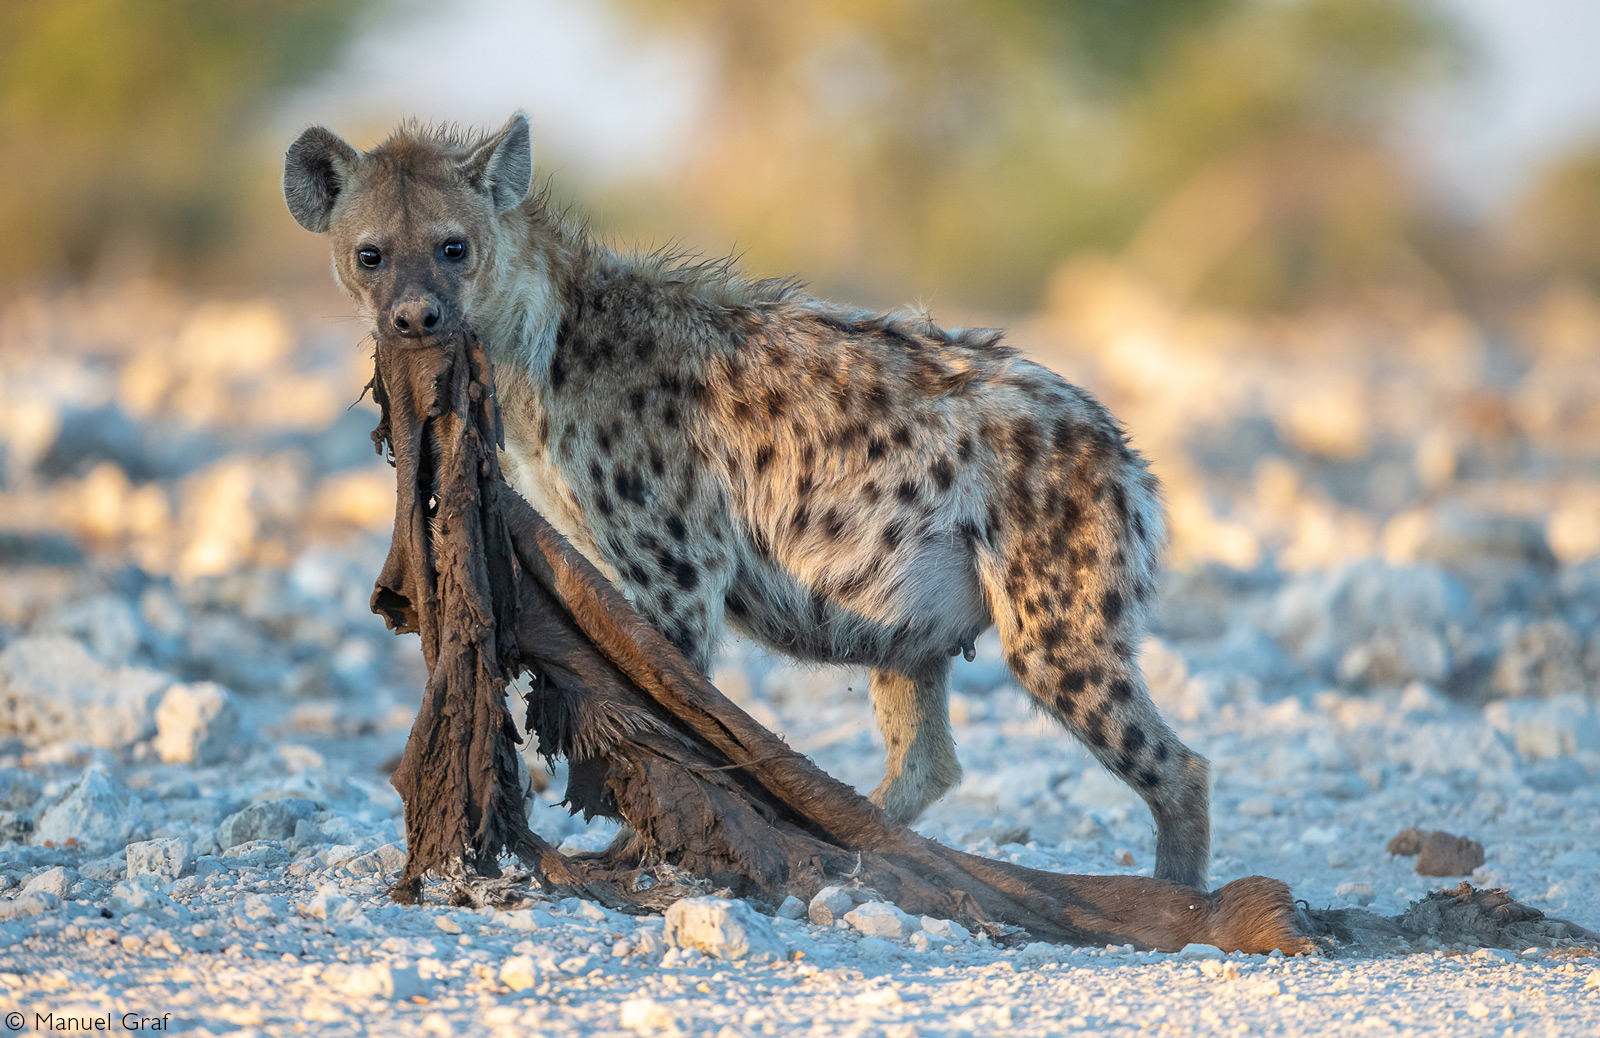 A spotted hyena carries the remains of a kill. Etosha National Park, Namibia © Manuel Graf